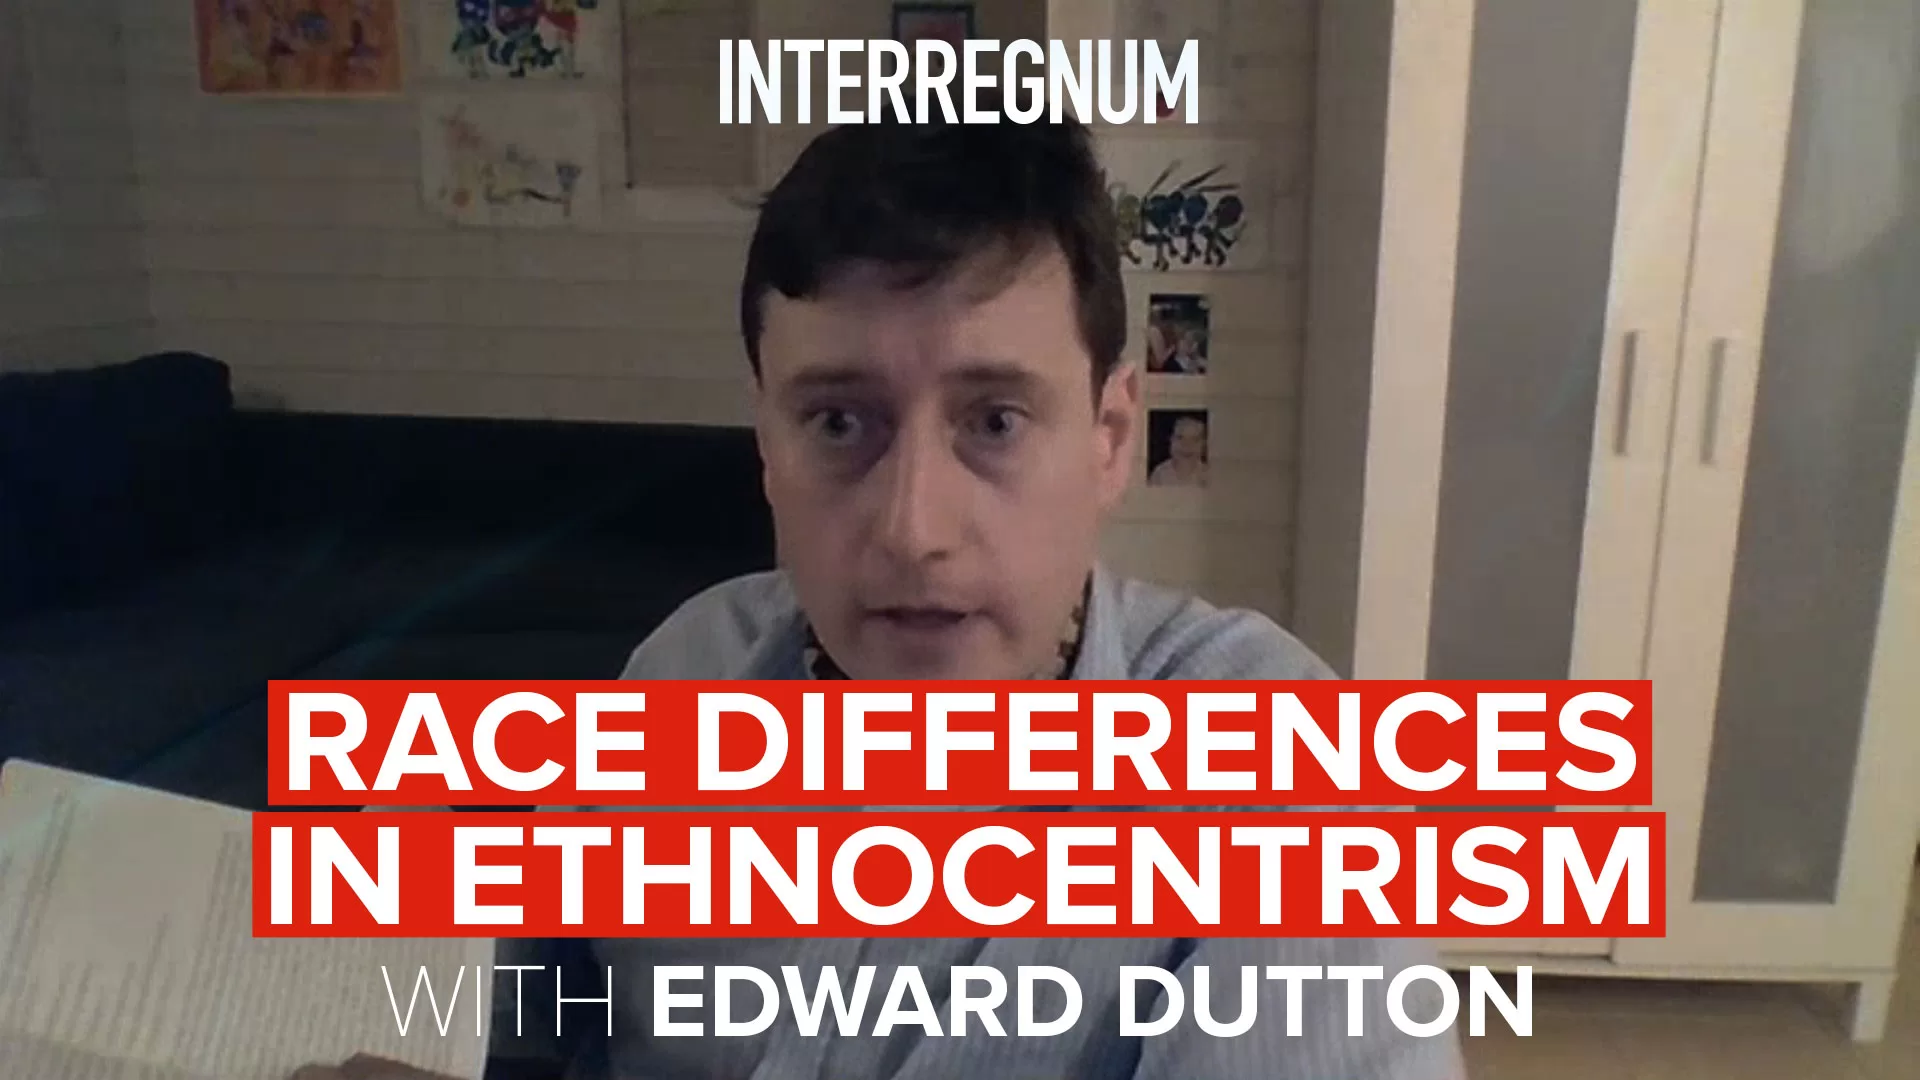 Race Differences in Ethnocentrism with Edward Dutton